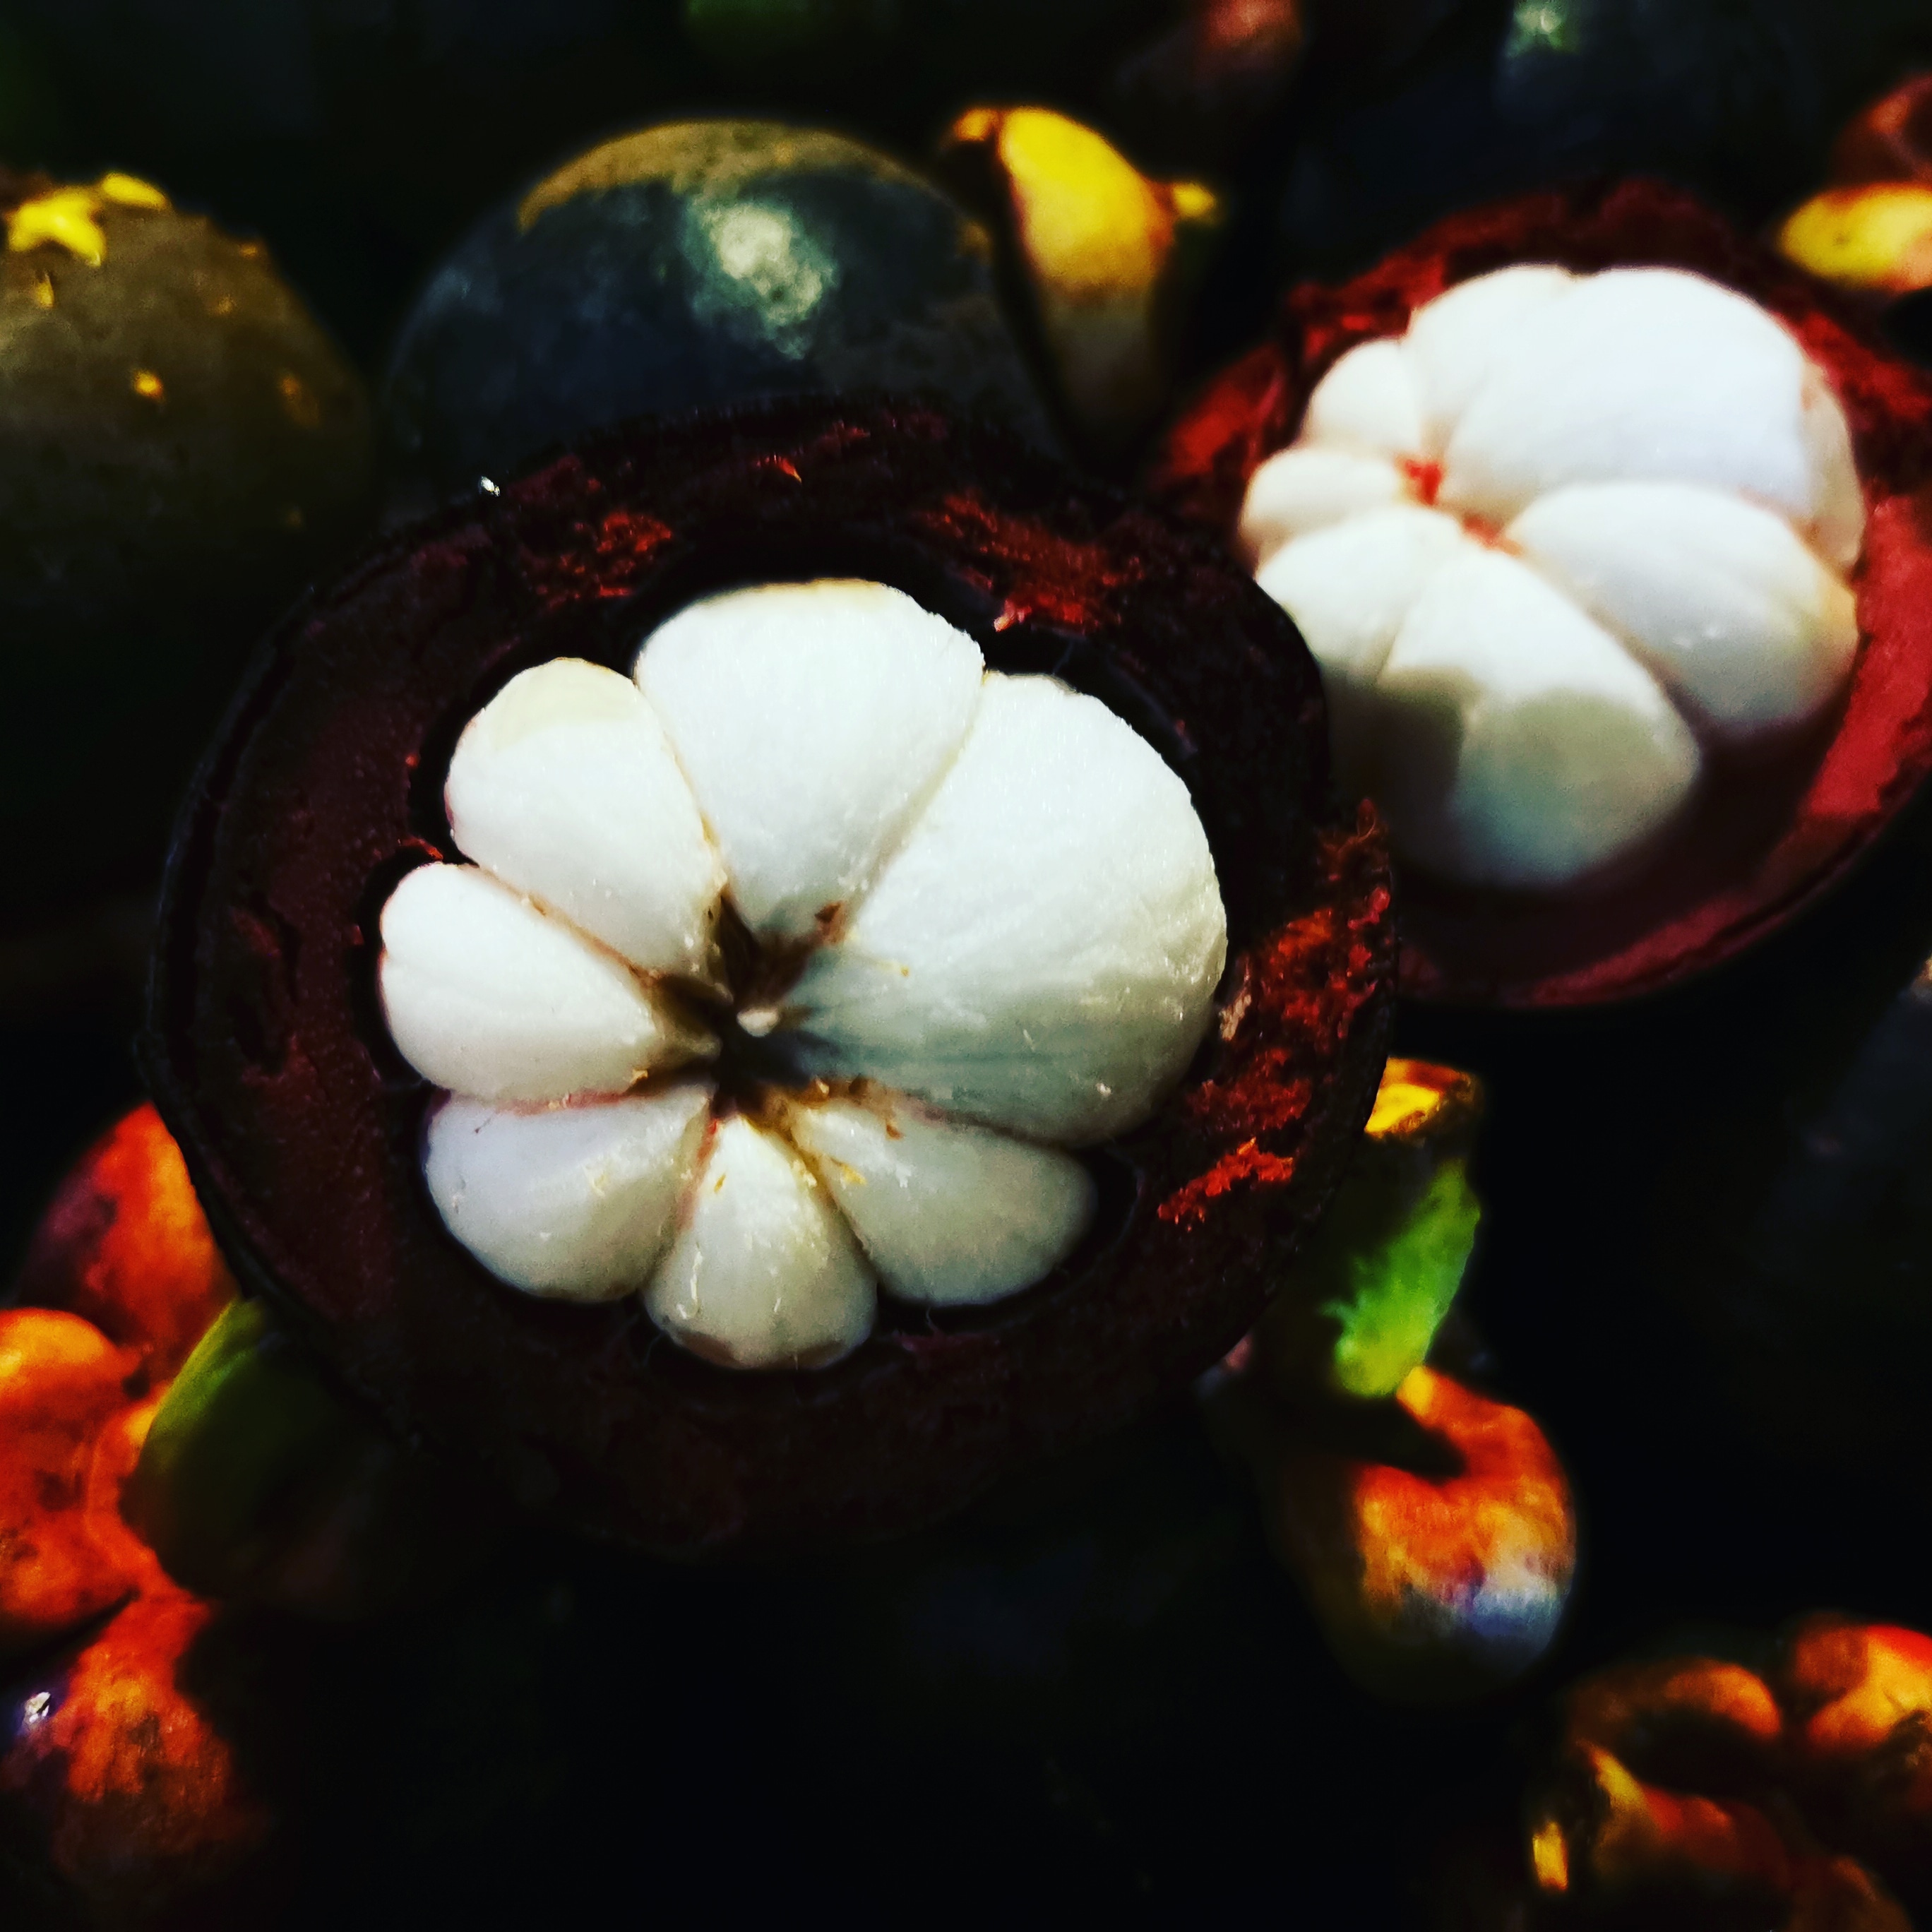 Mangosteen | One of the big four